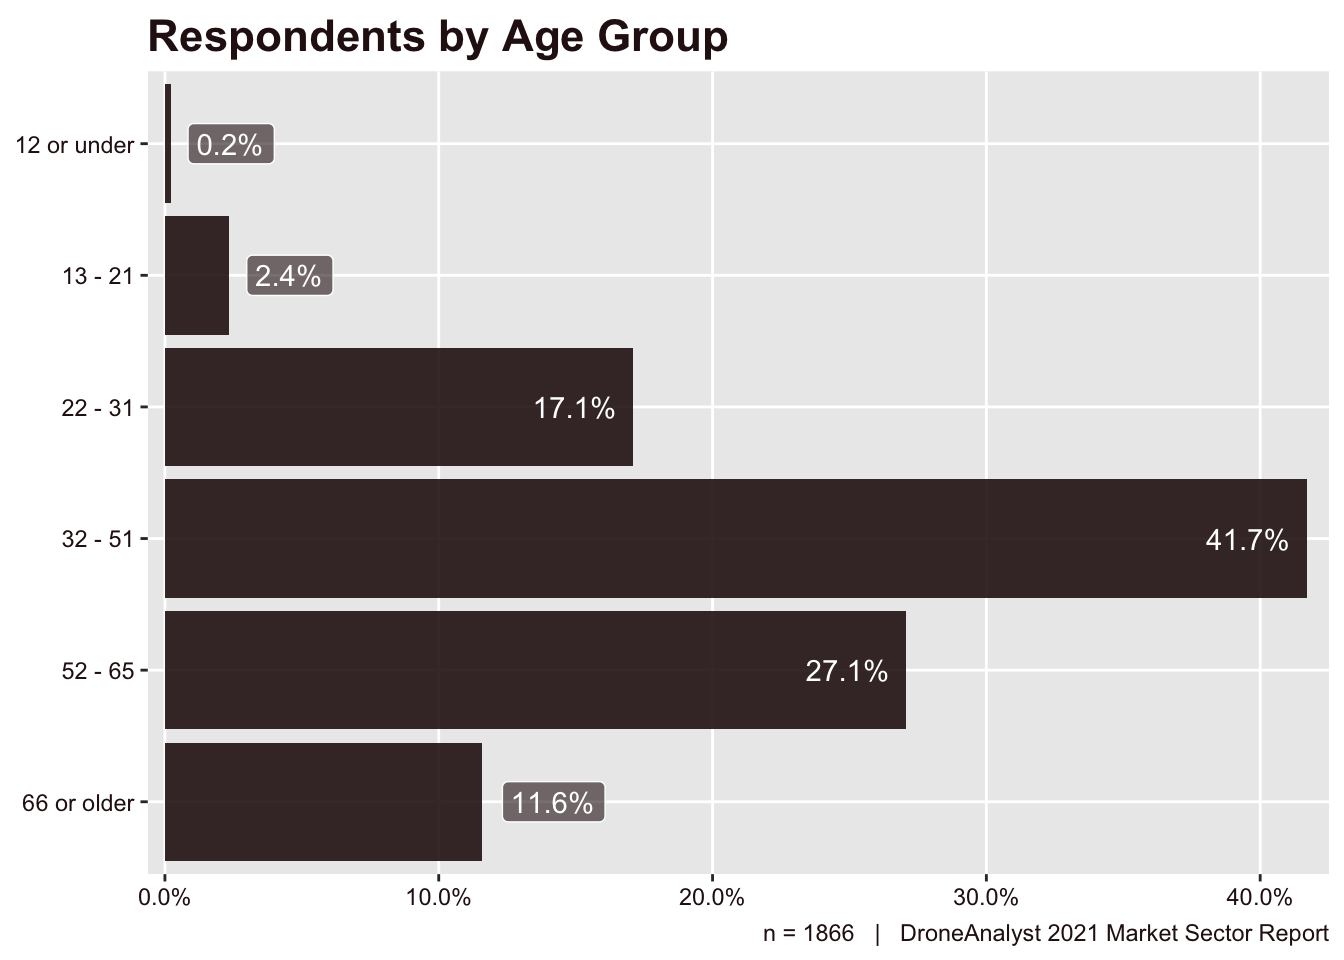 Respondents by Age Group